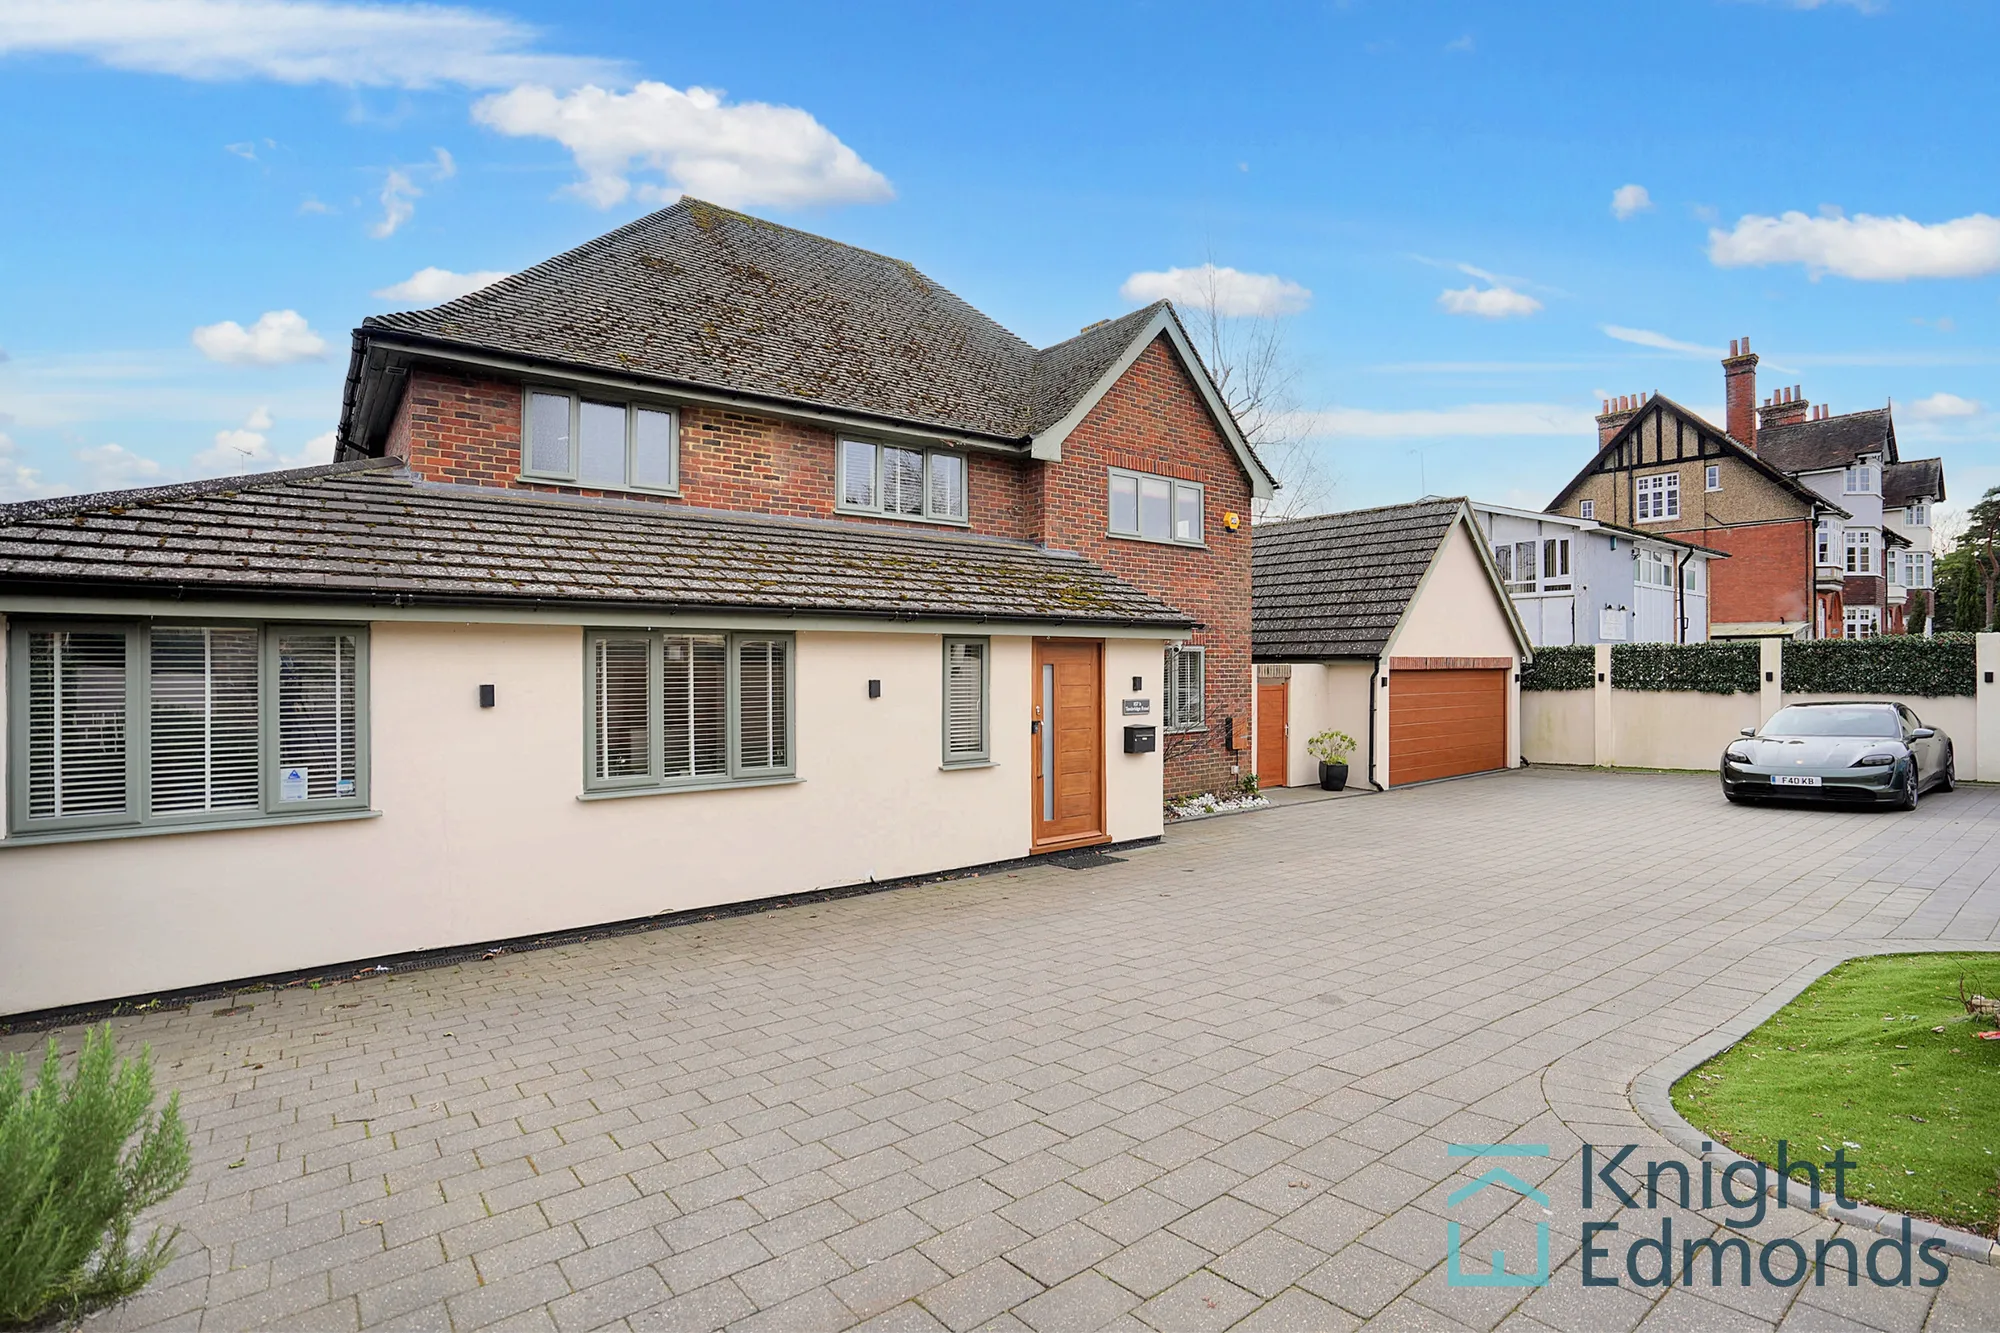 4 bed detached house for sale in Tonbridge Road, Maidstone - Property Image 1